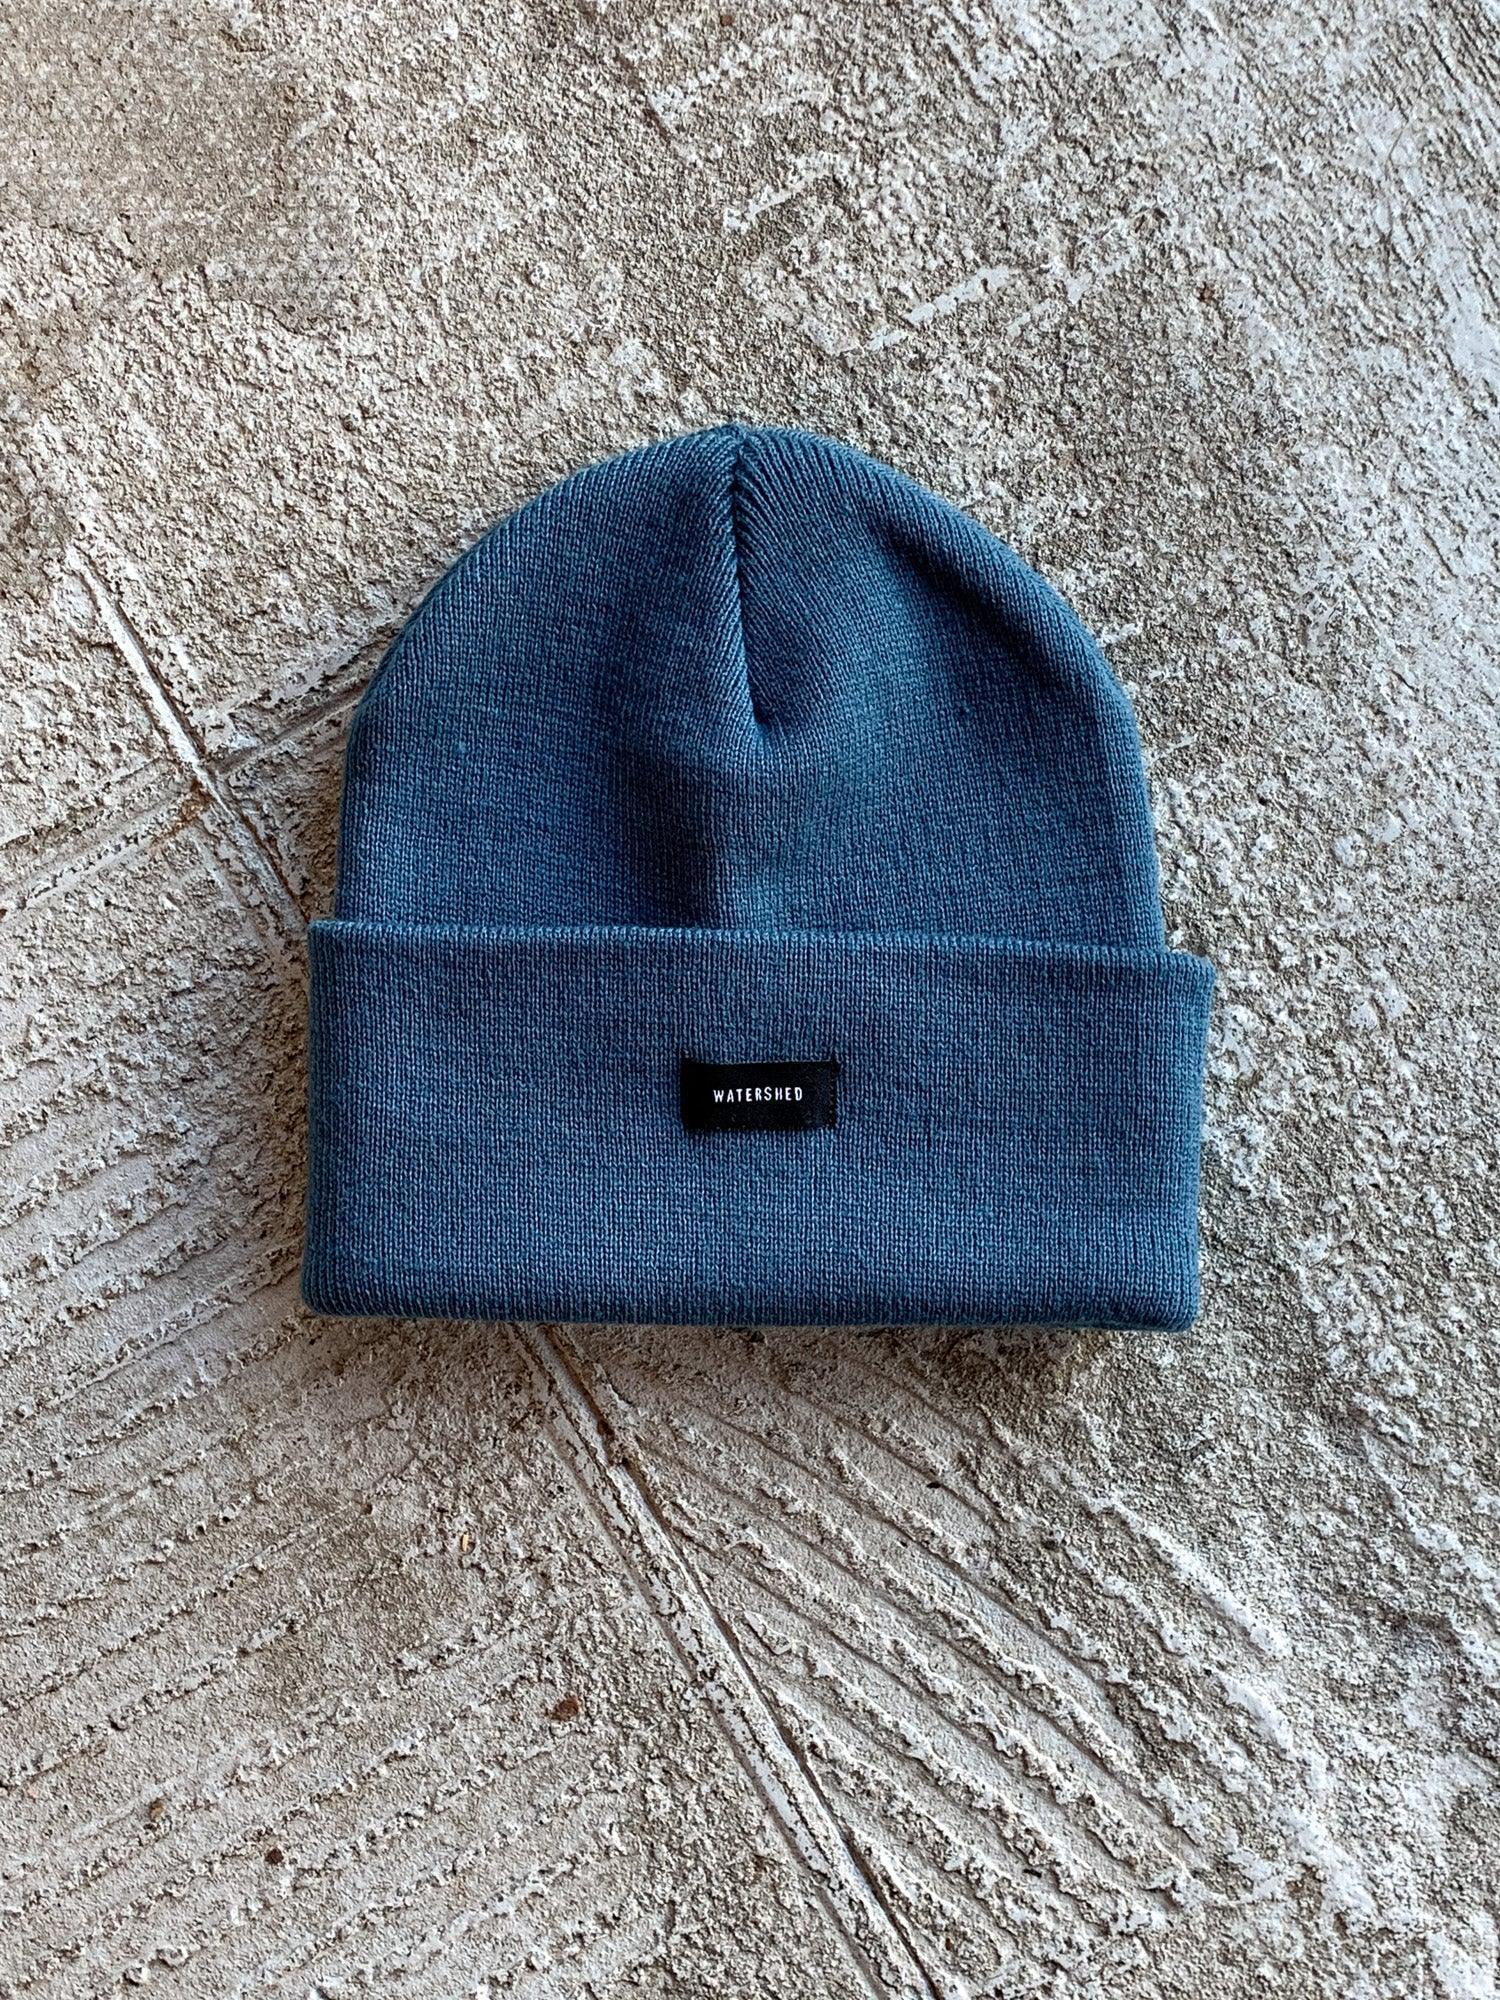 Standard Issue Beanie - Teal | Watershed Brand